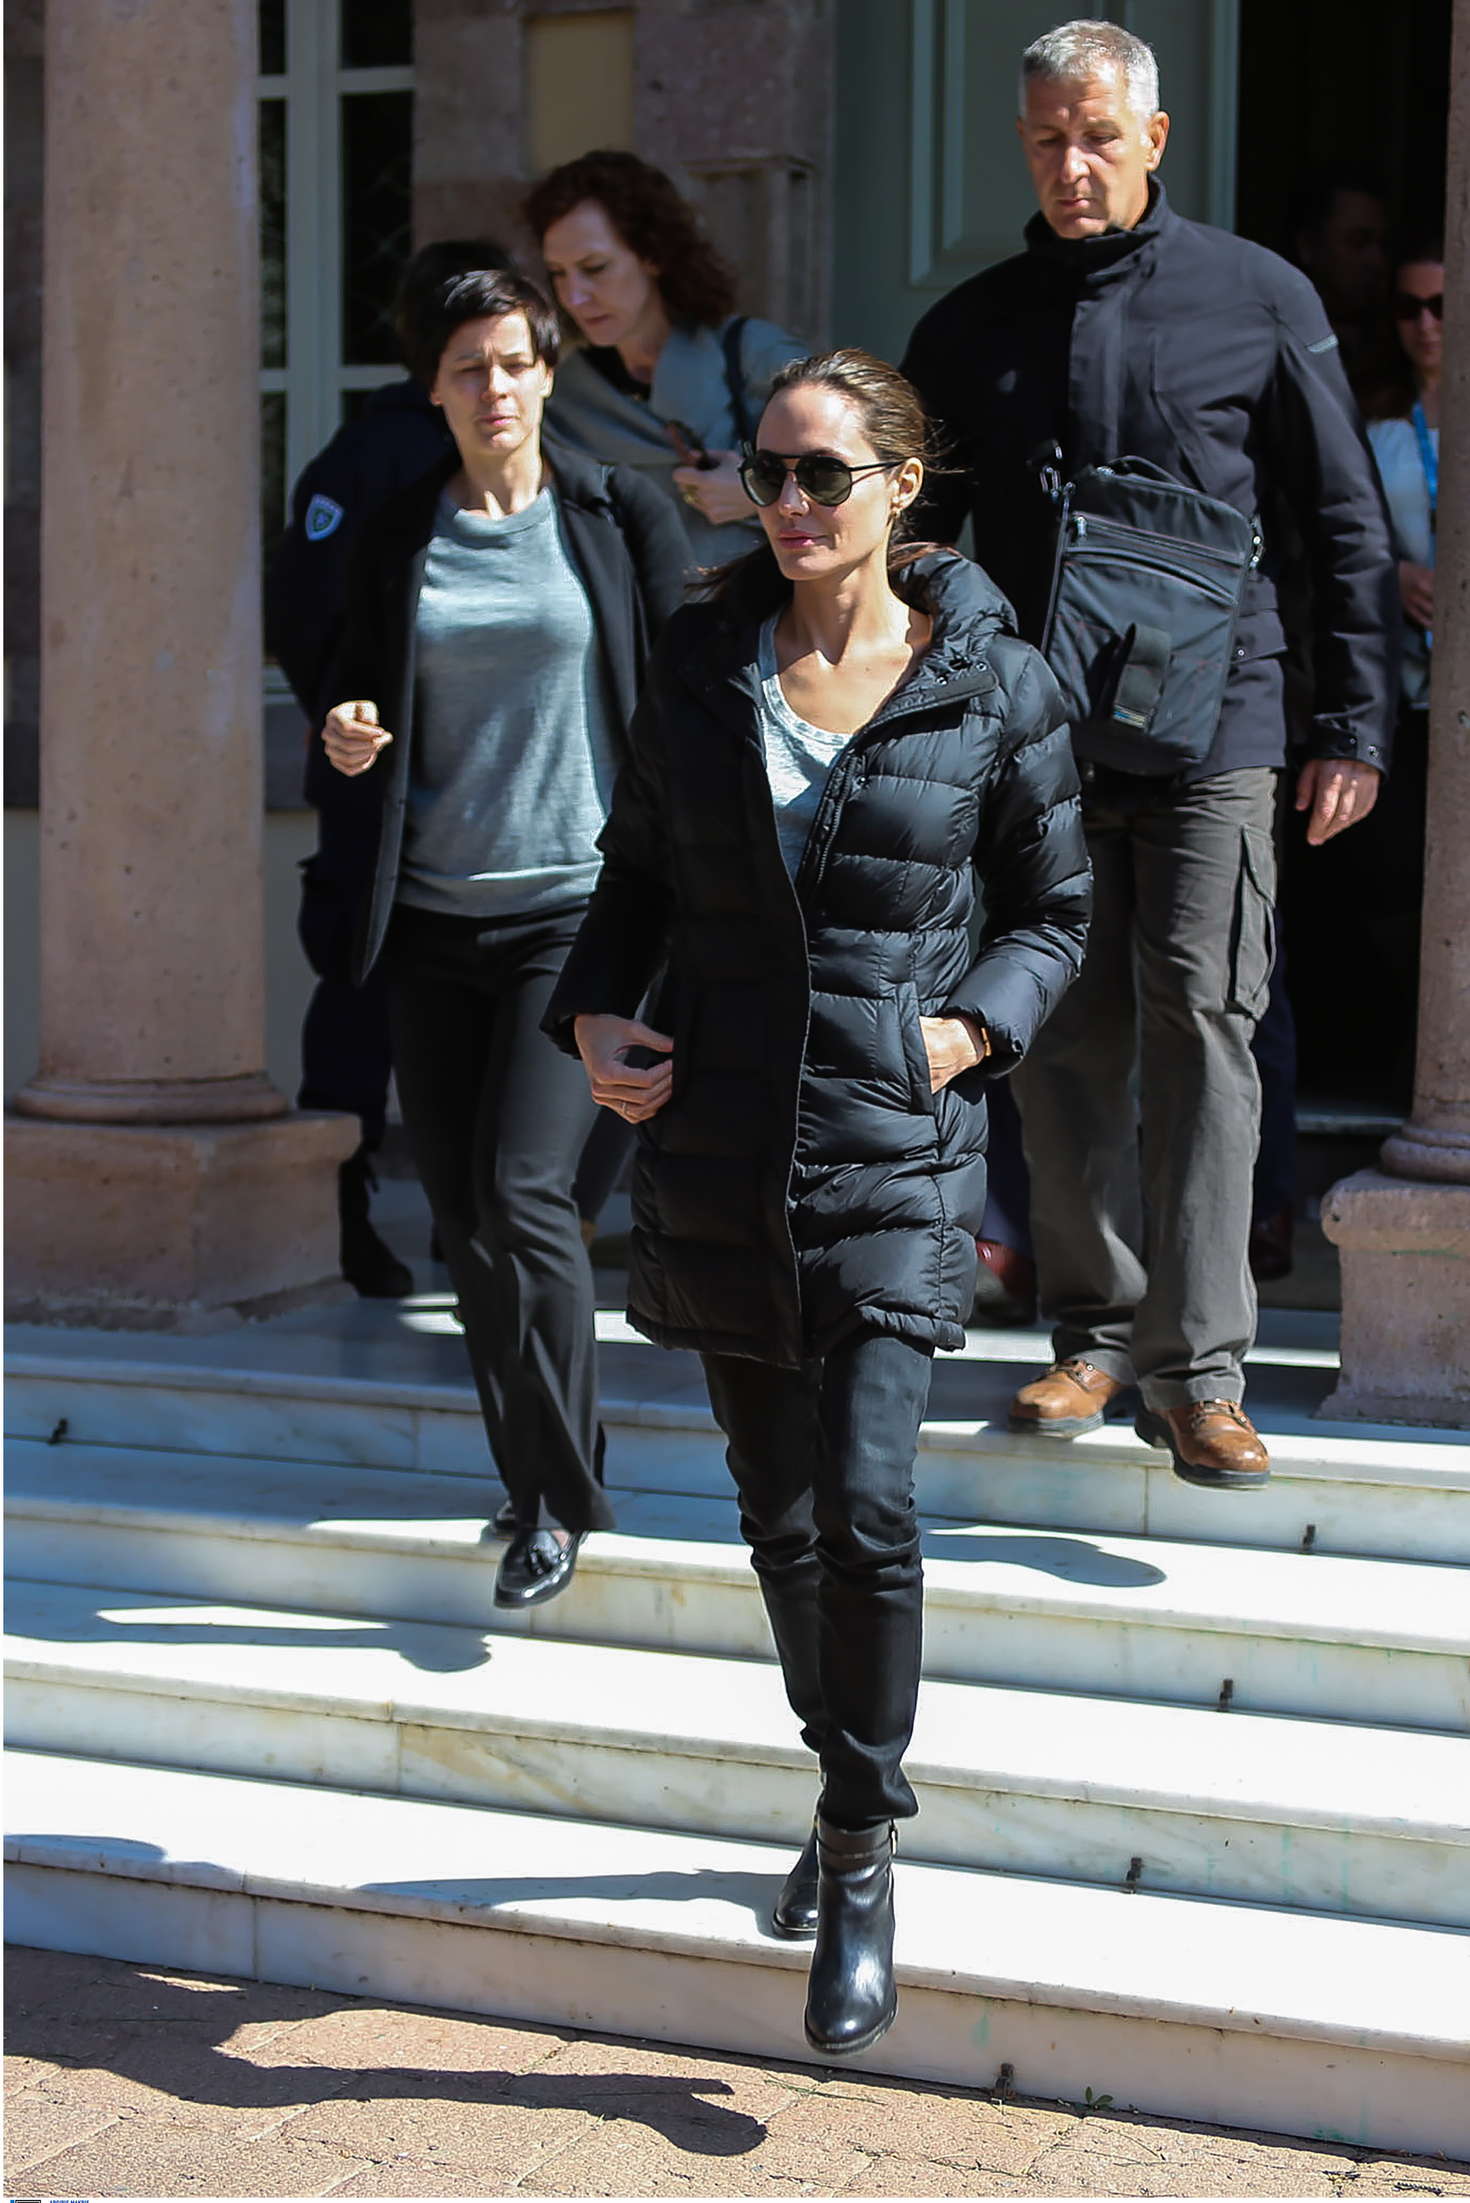 Angelina Jolie visited the island of Lesbos